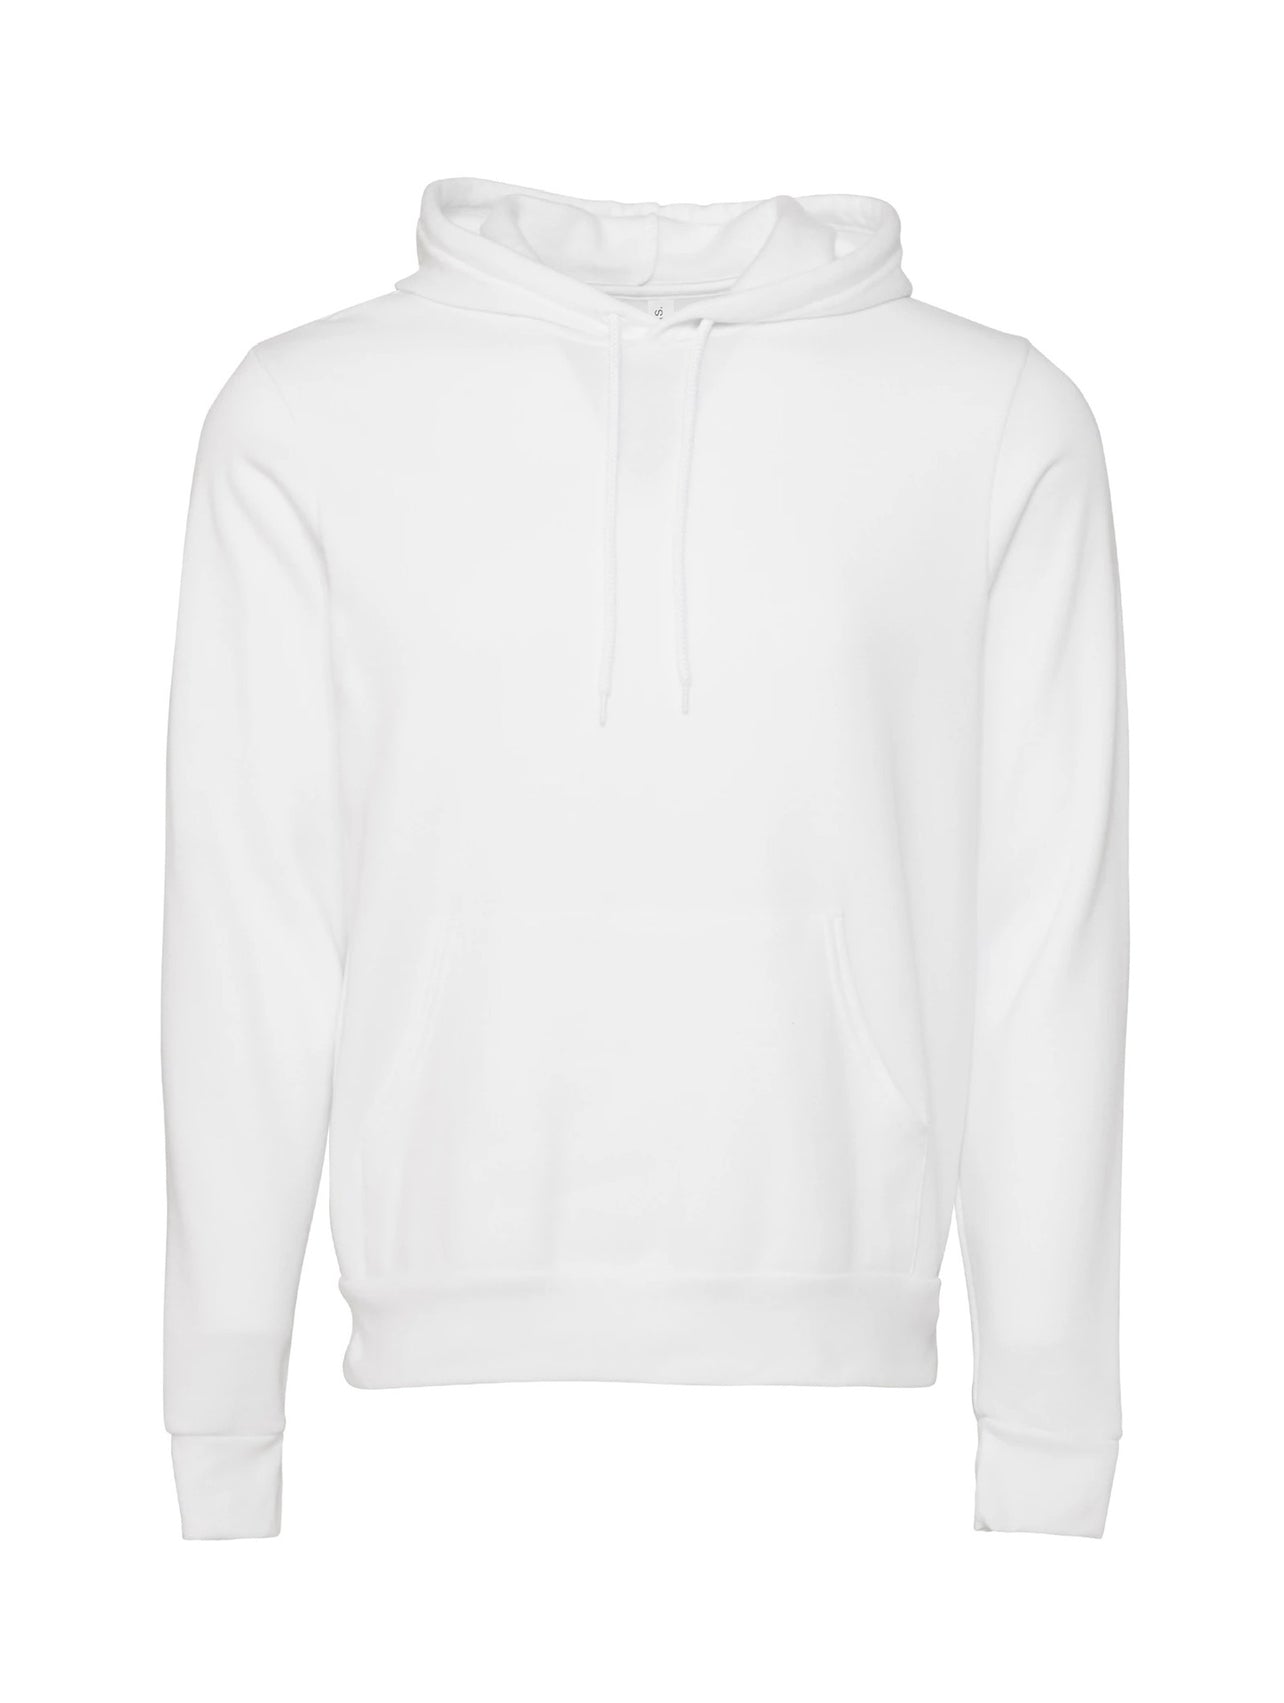 EmpowerHER Legacy DTG Hoodie (Unisex Sizing)